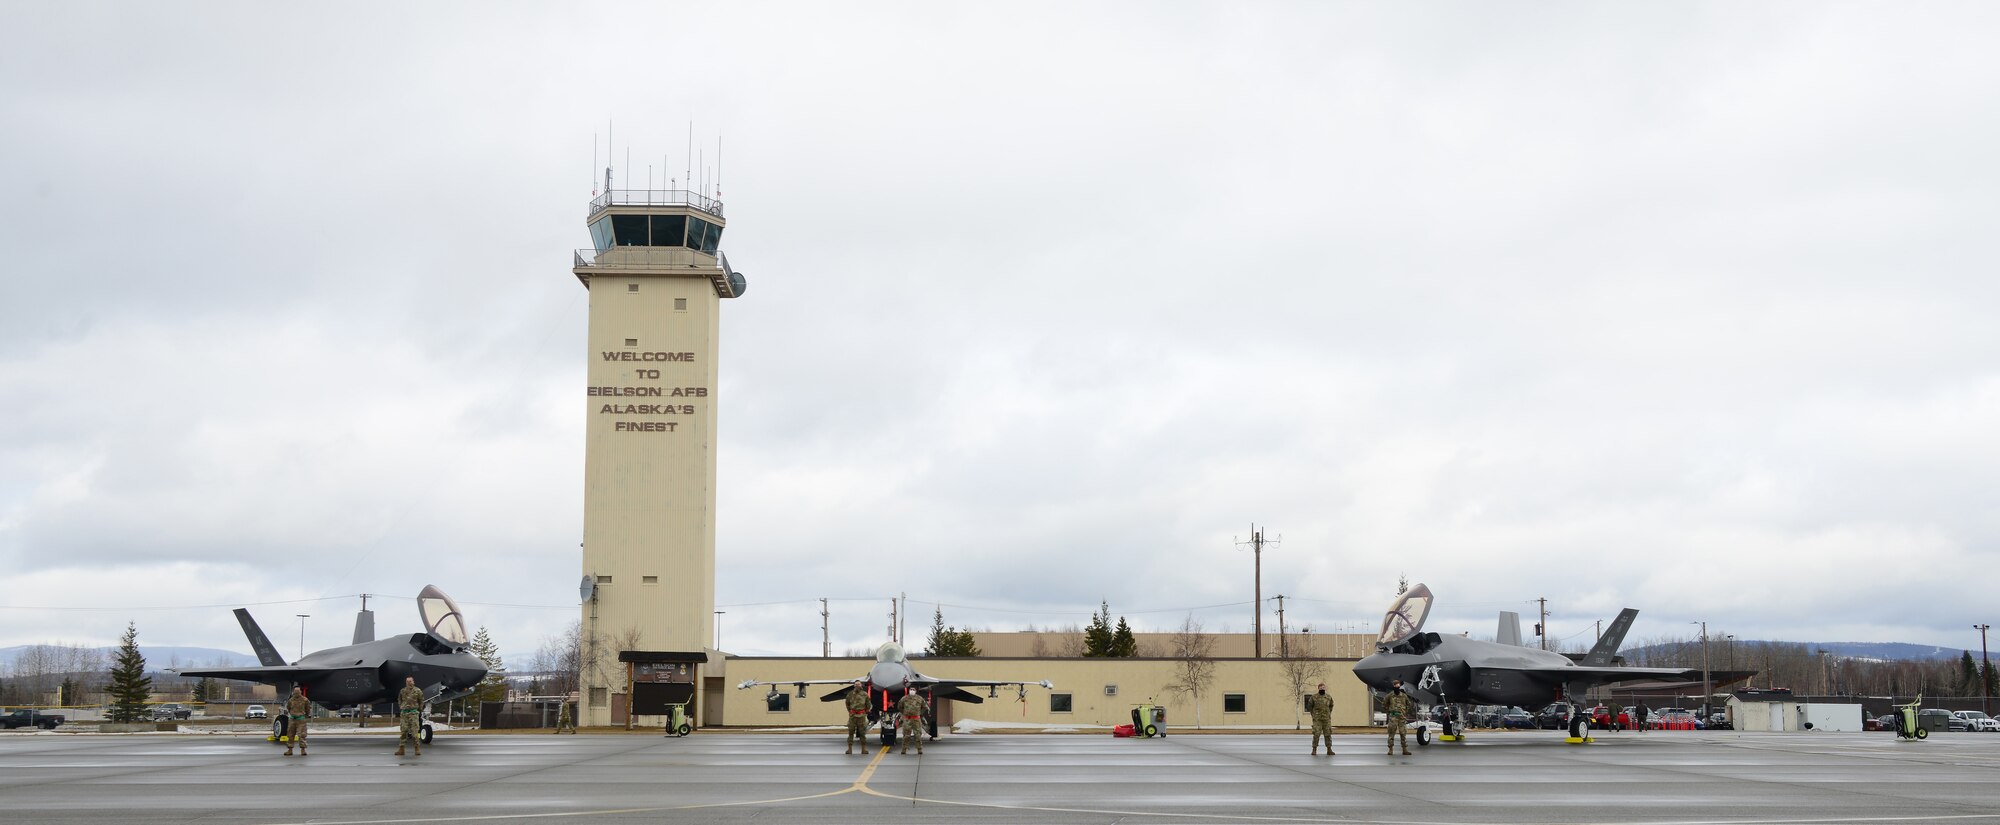 The first two U.S Air Force F-35A Lighting II fifth-generation fighters assigned to the 356th Fighter Squadron, join the 18th Aggressor Squadron at Eielson Air Force Base, Alaska, April 21, 2020.